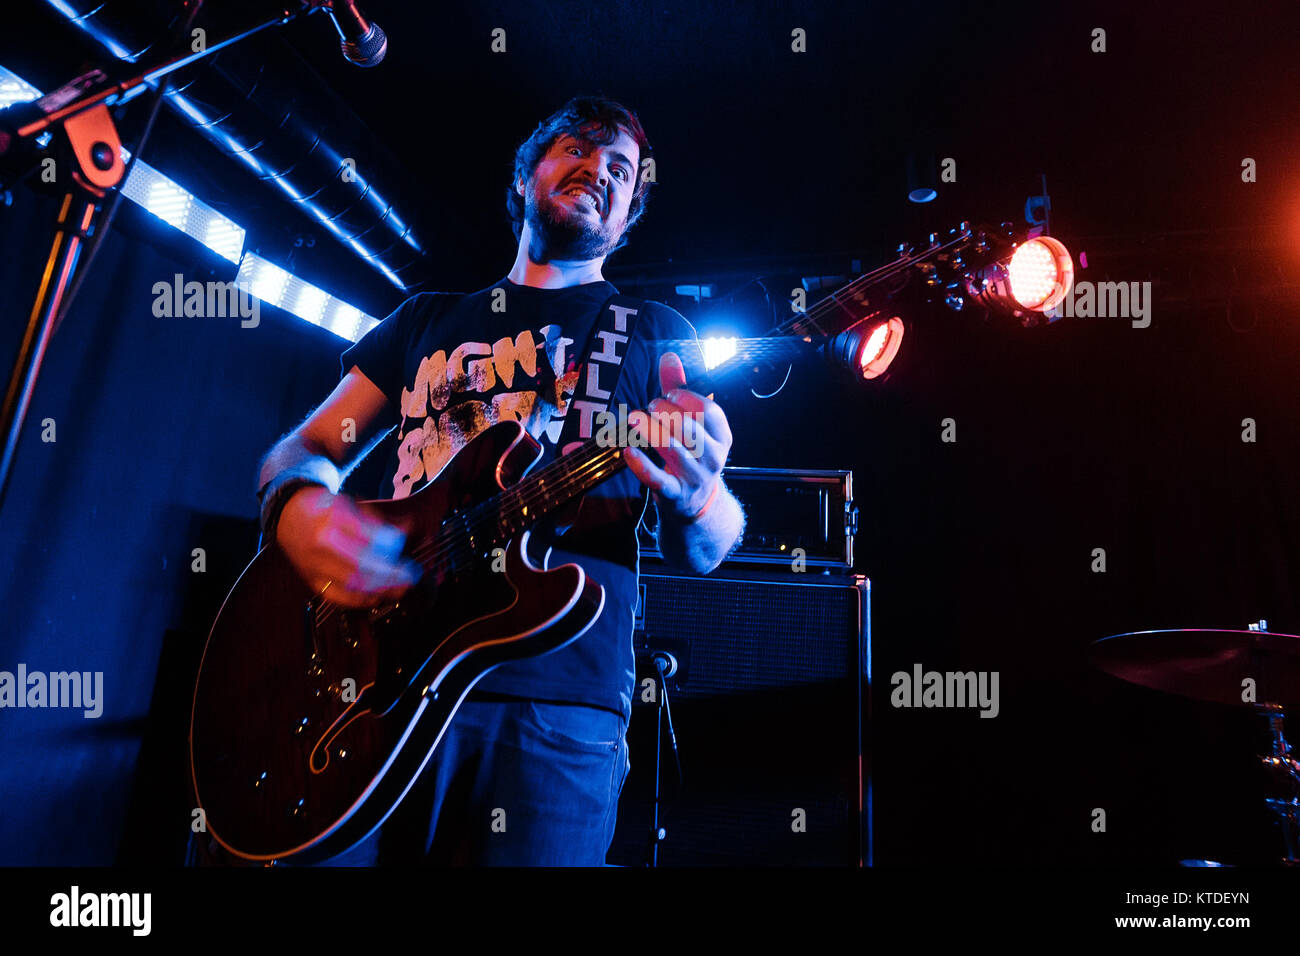 The American stoner and sludge metal band Torche performs a live concert at BETA in Copenhagen. Here guitarist Andrew Elstner is seen live on stage. Denmark, 08/11 2015. Stock Photo